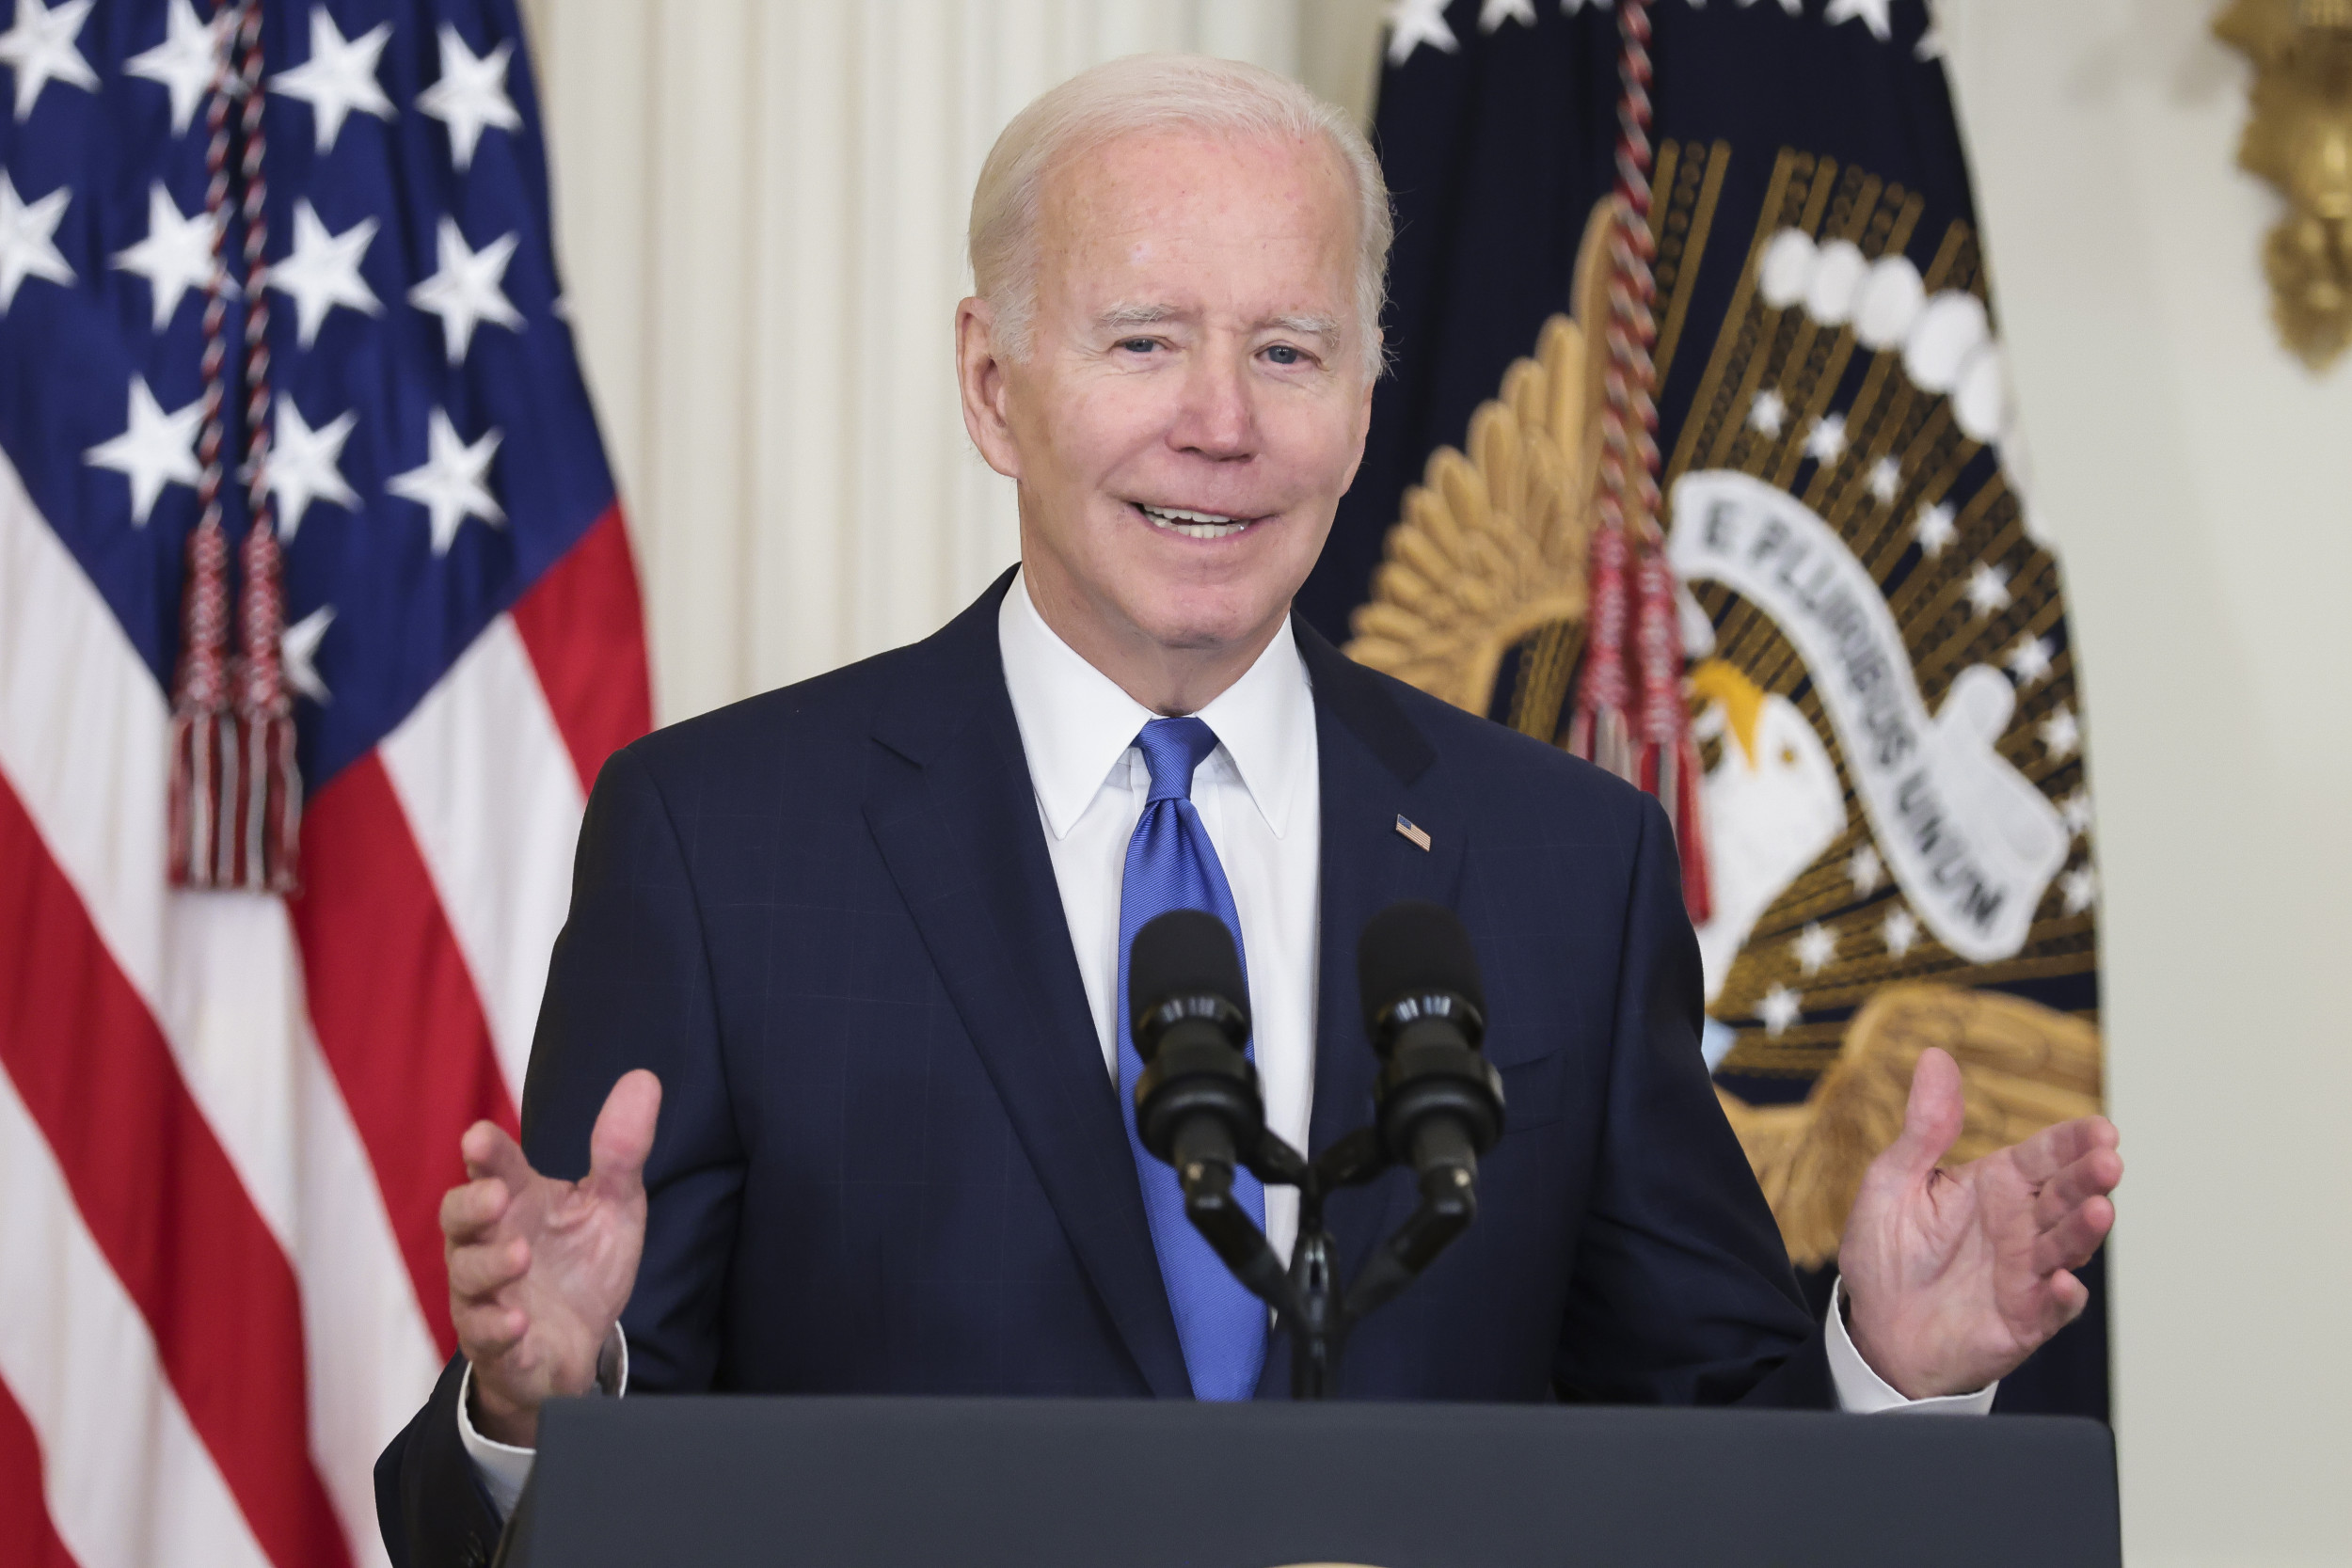 video-of-biden-saying-electric-cars-can-light-your-home-viewed-400k-times